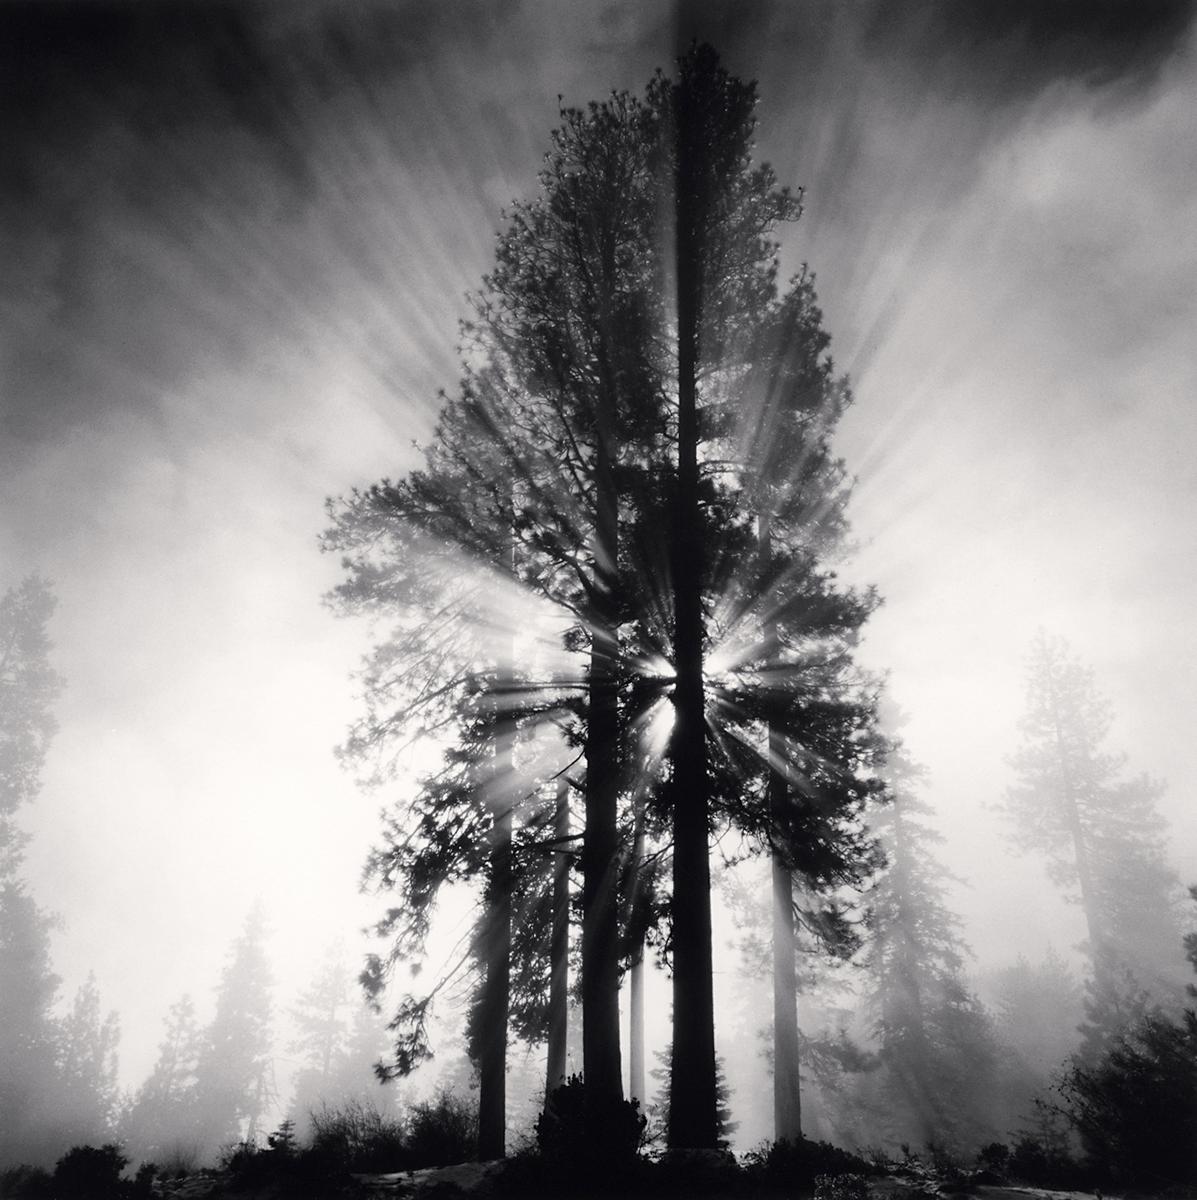 Avenue of Giants, Humbolt, California, USA by Michael Kenna depicts a dramatic forest scene. A grove of redwood trees is backlit by the sun. The harsh light diffuses through fog, and shines through the trees in striking rays. The glow of the light